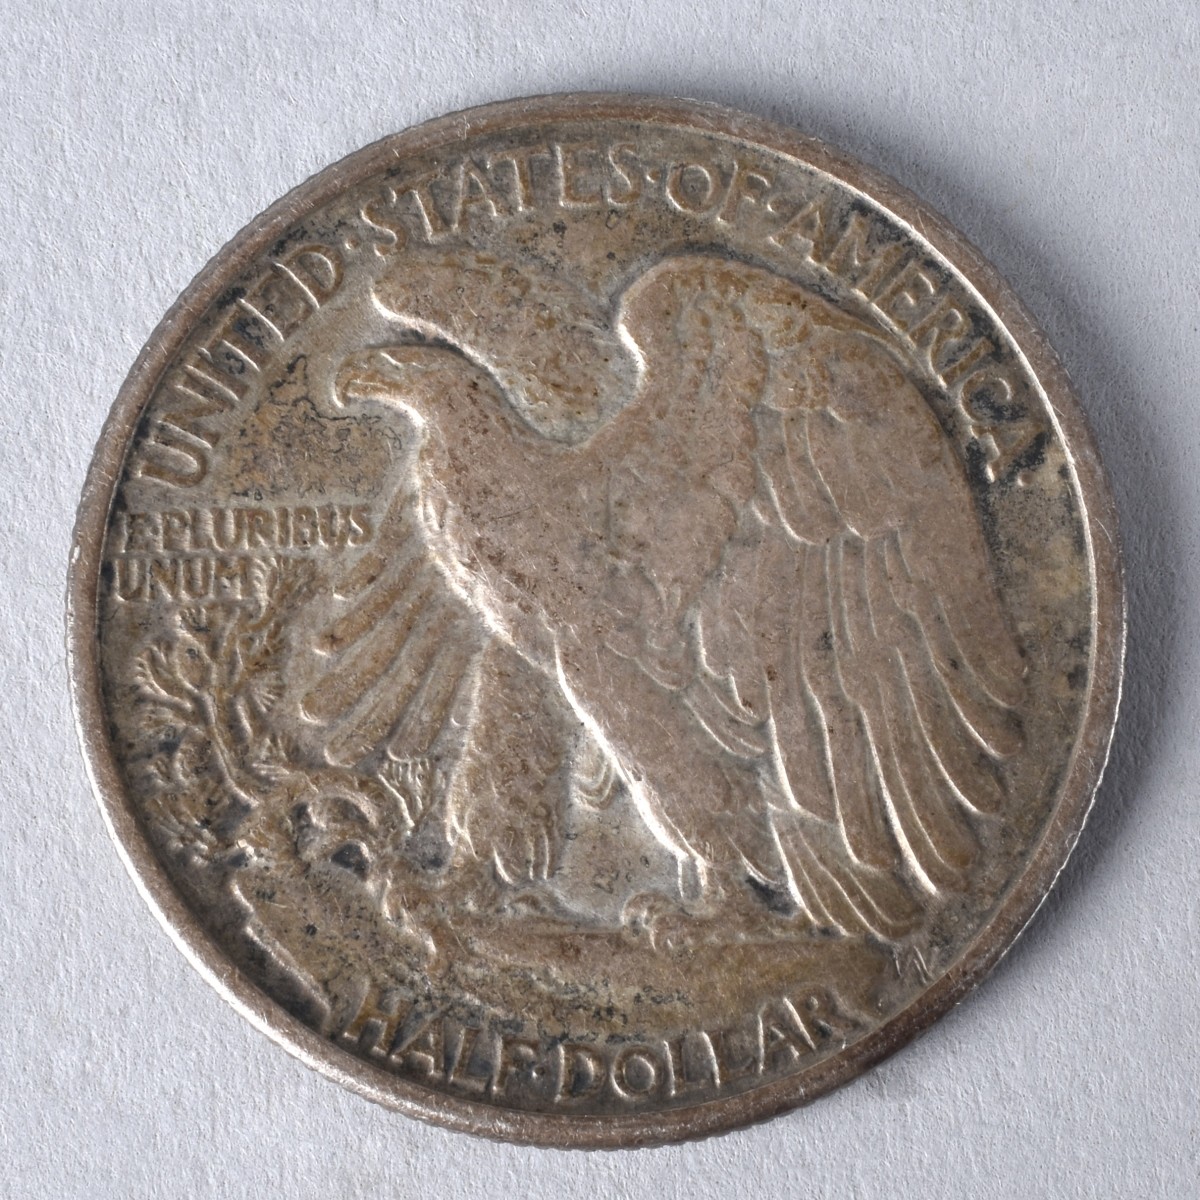 United States Silver Coins